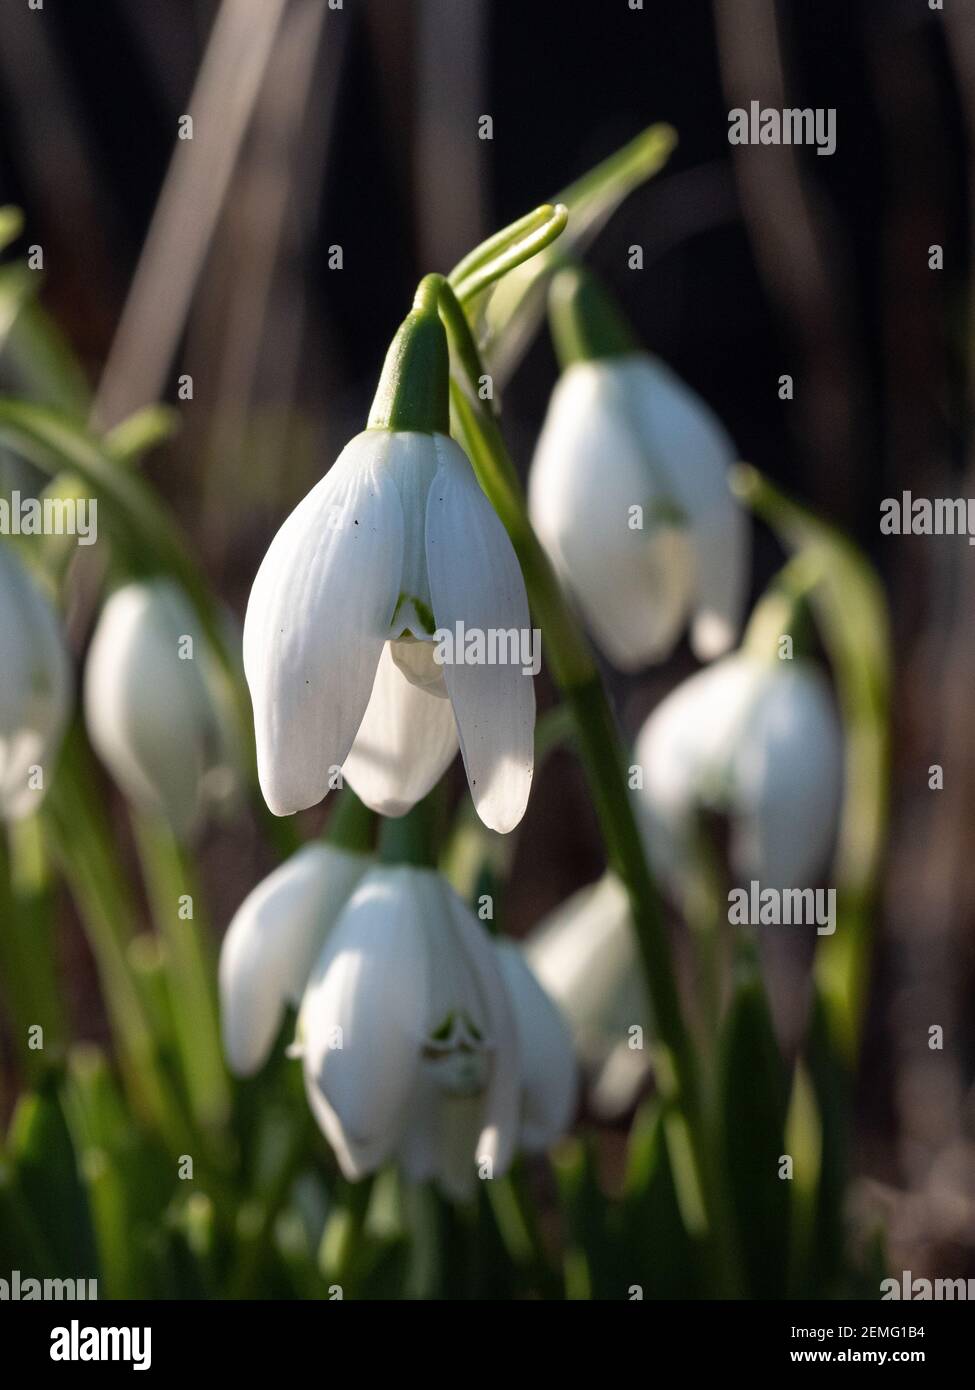 A close up of a small group of single snowdrop - Galanthus nivalis flowers Stock Photo